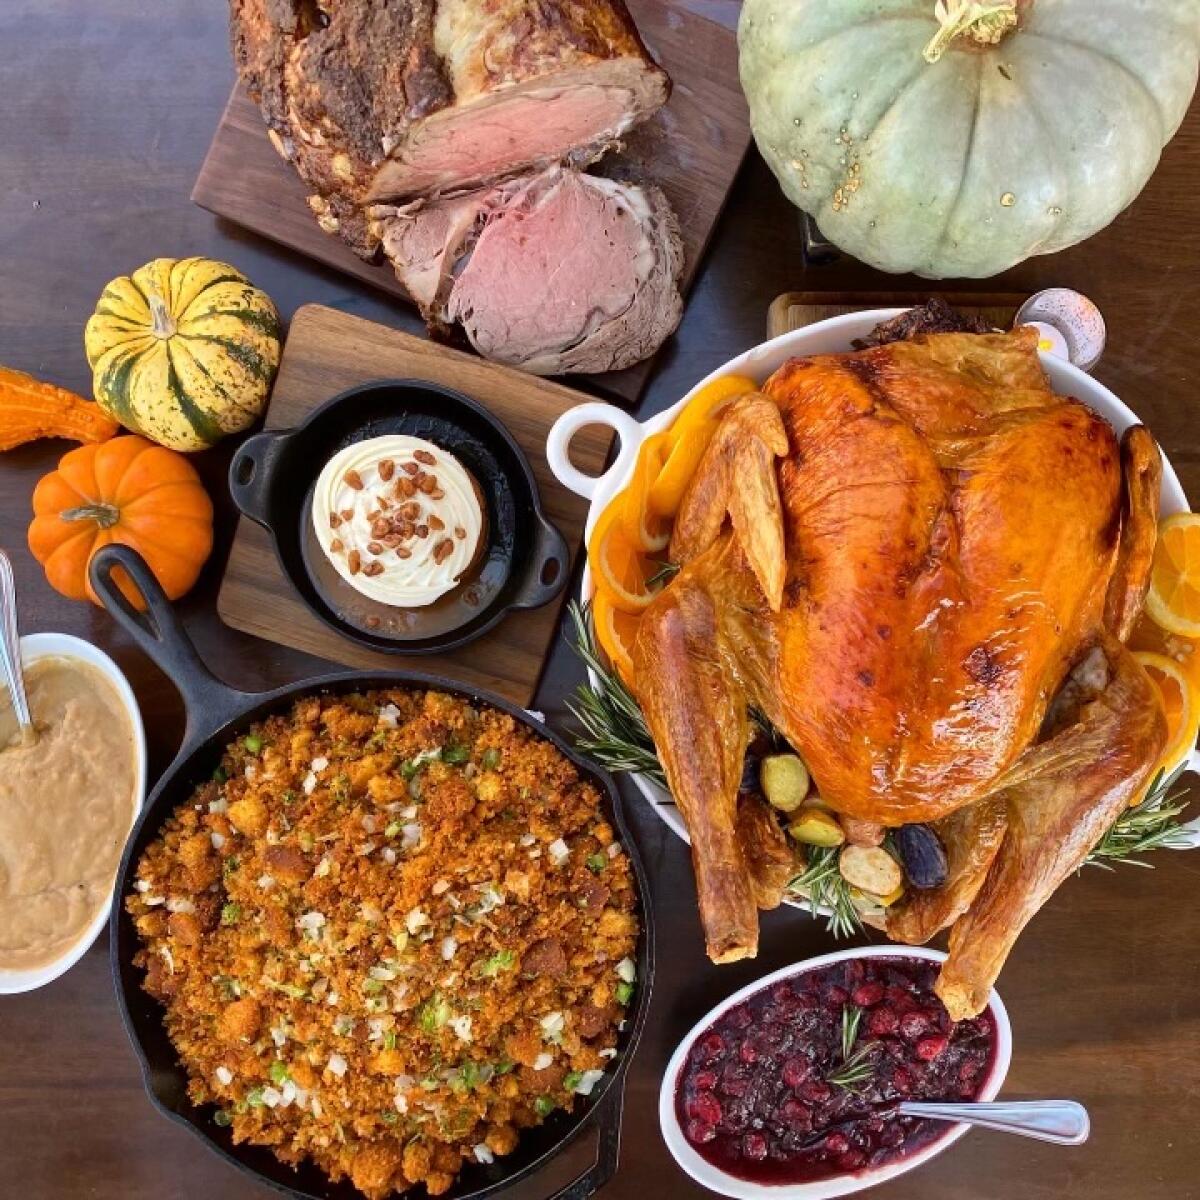 Bosscat’s Take Home Feast features a maple bourbon-brined turkey or brown sugar baked ham.